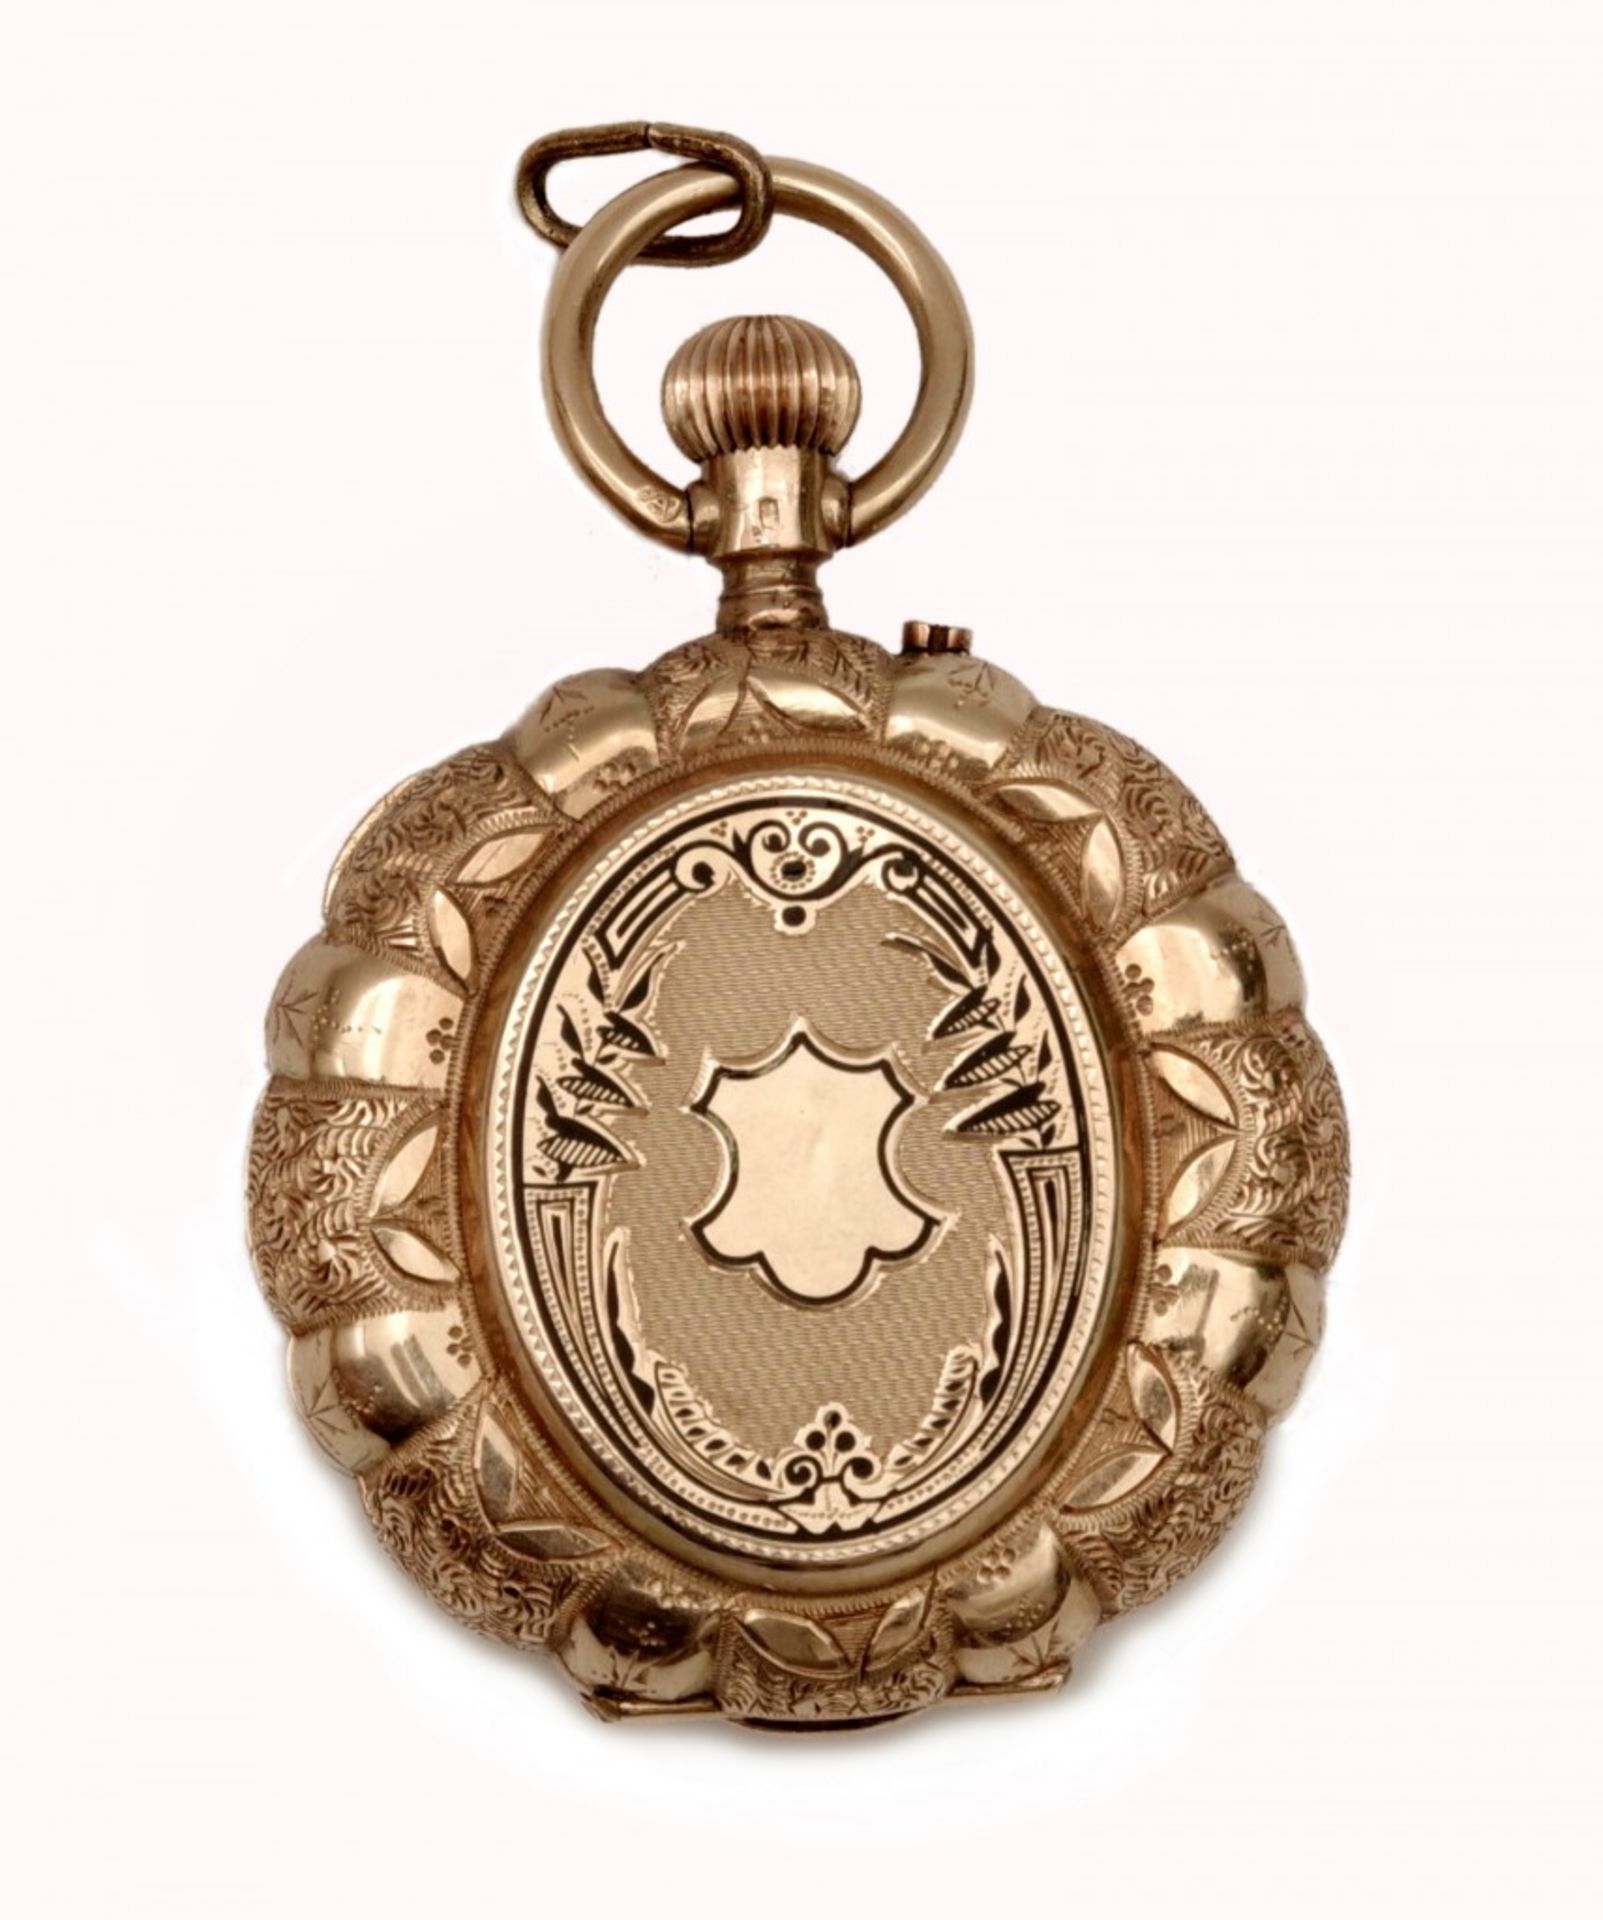 A Lady´s Gold Enamel Pocket Watch with Cylinder Escapement - Image 2 of 5